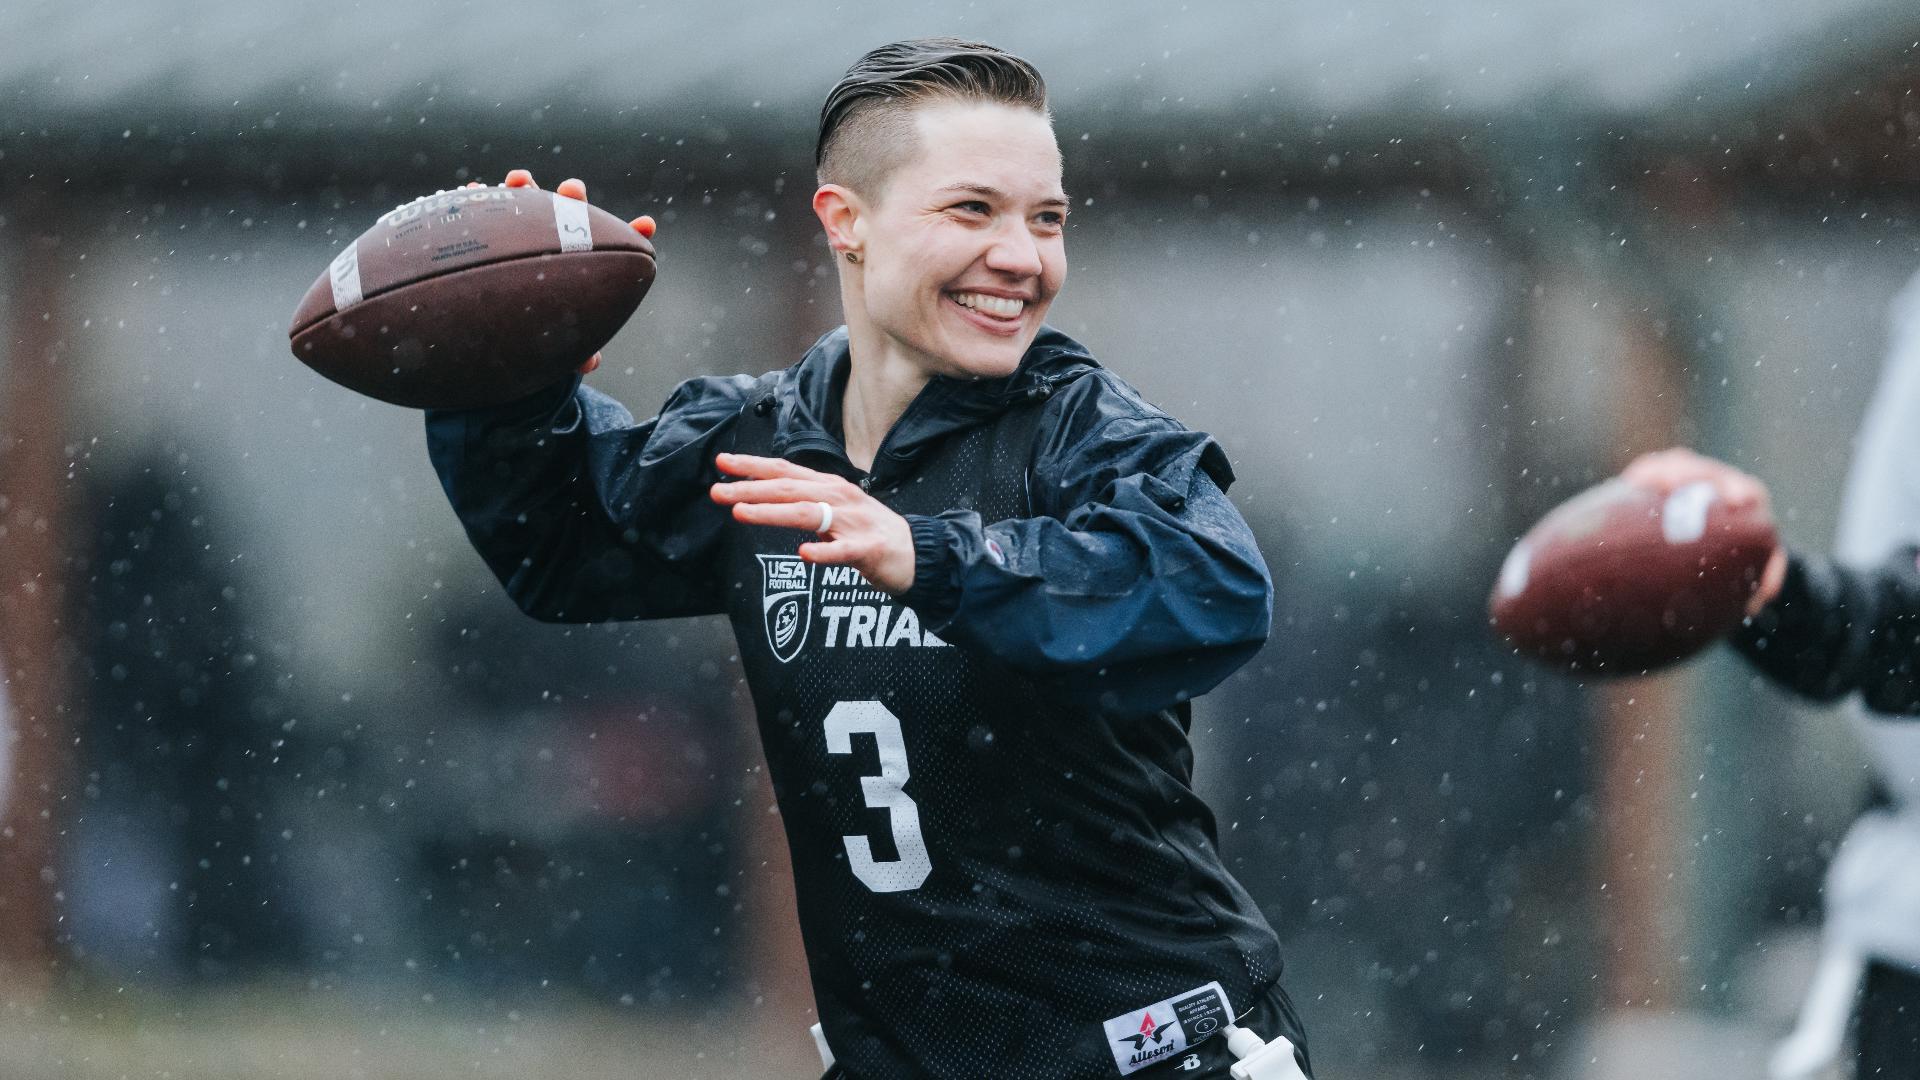 Lacey Abell has been playing flag football for the Mile High Club since she moved to Denver in 2020. She hopes to make the inaugural Team USA Olympic team in 2028.